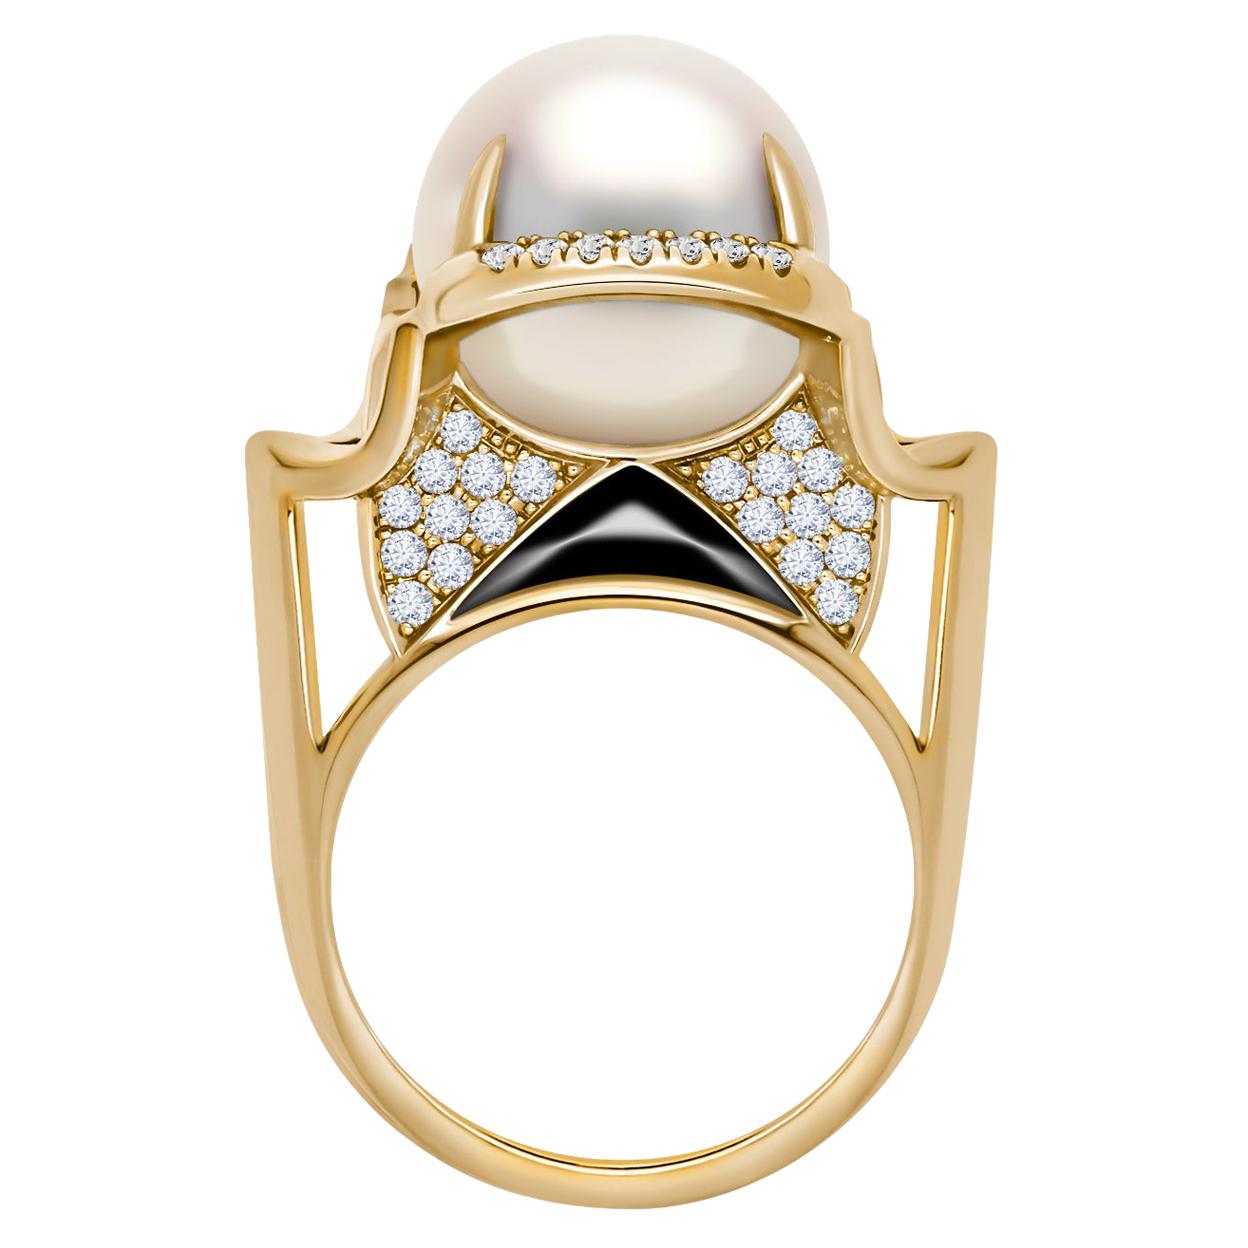 Angie Marei Isis Goddess South Sea Pearl & Diamond Ring in 18K Yellow Gold